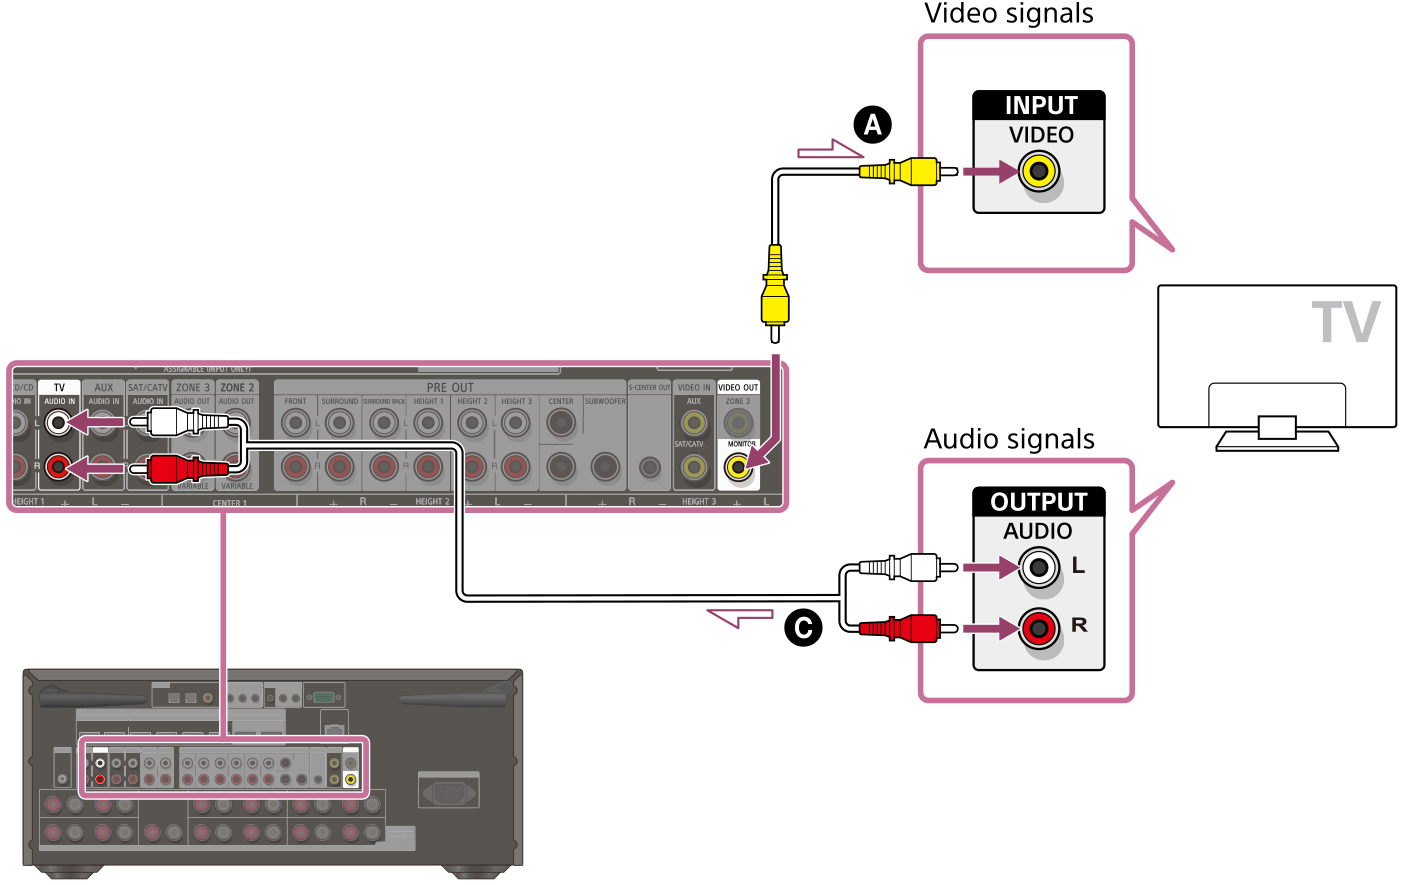 Illustration of connecting the TV and receiver. Connect the VIDEO OUT MONITOR jack on the rear of the receiver with the VIDEO INPUT jack on the rear of your TV using a video cable (not supplied). Connect the TV AUDIO IN jacks on the rear of the receiver with the AUDIO OUTPUT jacks on the rear of your TV using an audio cable (not supplied).